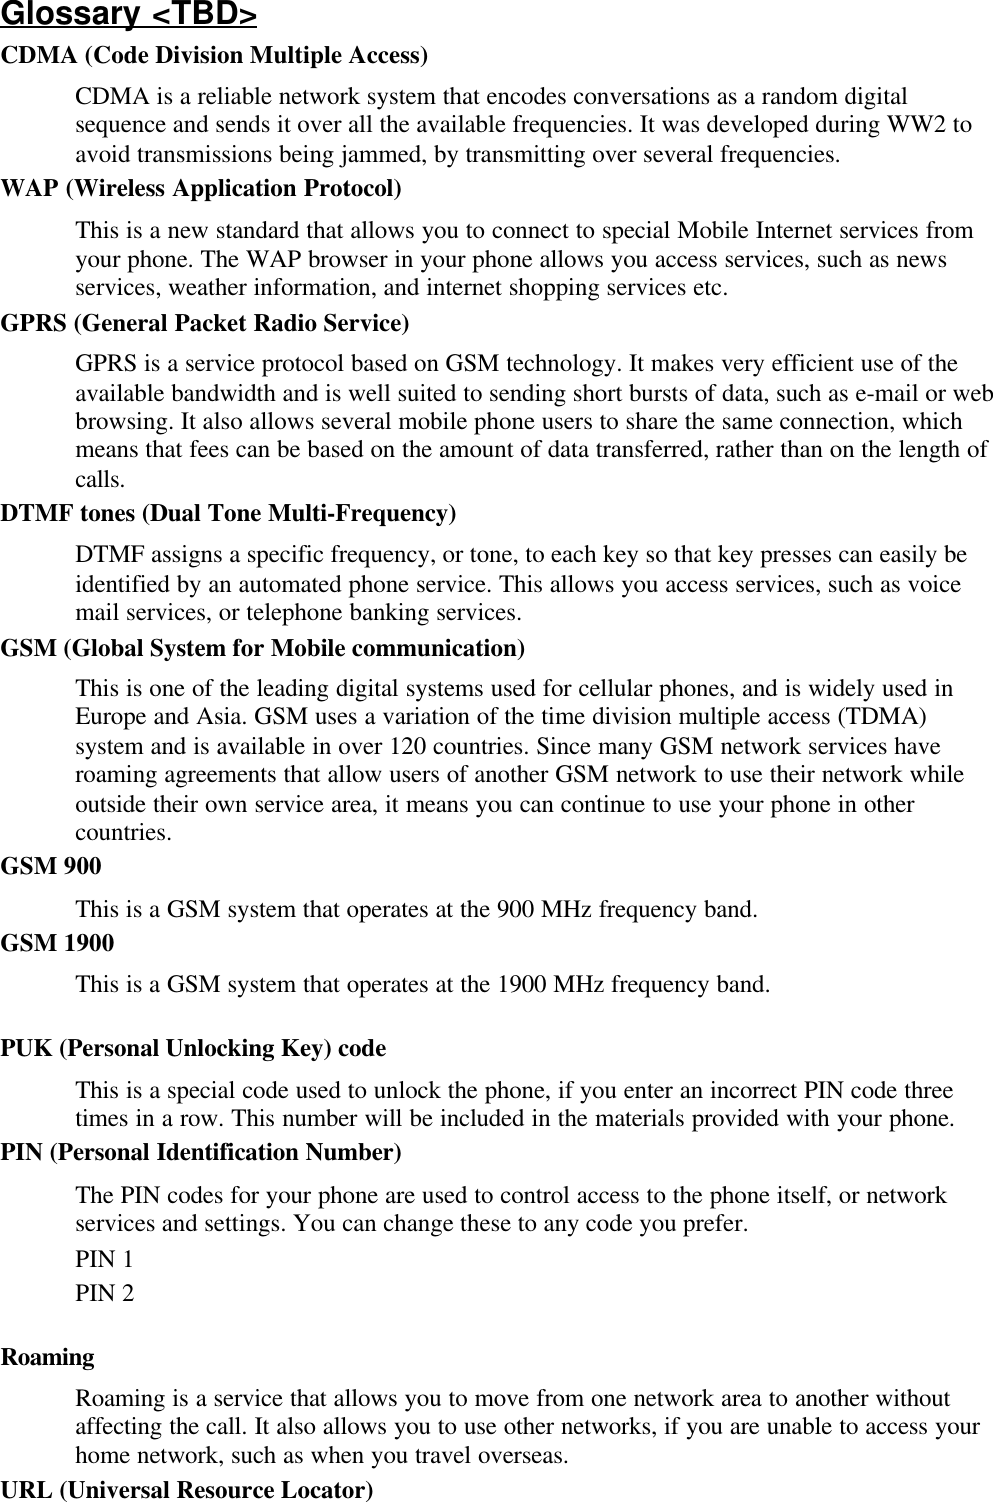 Glossary &lt;TBD&gt;CDMA (Code Division Multiple Access)CDMA is a reliable network system that encodes conversations as a random digitalsequence and sends it over all the available frequencies. It was developed during WW2 toavoid transmissions being jammed, by transmitting over several frequencies.WAP (Wireless Application Protocol)This is a new standard that allows you to connect to special Mobile Internet services fromyour phone. The WAP browser in your phone allows you access services, such as newsservices, weather information, and internet shopping services etc.GPRS (General Packet Radio Service)GPRS is a service protocol based on GSM technology. It makes very efficient use of theavailable bandwidth and is well suited to sending short bursts of data, such as e-mail or webbrowsing. It also allows several mobile phone users to share the same connection, whichmeans that fees can be based on the amount of data transferred, rather than on the length ofcalls.DTMF tones (Dual Tone Multi-Frequency)DTMF assigns a specific frequency, or tone, to each key so that key presses can easily beidentified by an automated phone service. This allows you access services, such as voicemail services, or telephone banking services.GSM (Global System for Mobile communication)This is one of the leading digital systems used for cellular phones, and is widely used inEurope and Asia. GSM uses a variation of the time division multiple access (TDMA)system and is available in over 120 countries. Since many GSM network services haveroaming agreements that allow users of another GSM network to use their network whileoutside their own service area, it means you can continue to use your phone in othercountries.GSM 900This is a GSM system that operates at the 900 MHz frequency band.GSM 1900This is a GSM system that operates at the 1900 MHz frequency band.PUK (Personal Unlocking Key) codeThis is a special code used to unlock the phone, if you enter an incorrect PIN code threetimes in a row. This number will be included in the materials provided with your phone.PIN (Personal Identification Number)The PIN codes for your phone are used to control access to the phone itself, or networkservices and settings. You can change these to any code you prefer.PIN 1PIN 2RoamingRoaming is a service that allows you to move from one network area to another withoutaffecting the call. It also allows you to use other networks, if you are unable to access yourhome network, such as when you travel overseas.URL (Universal Resource Locator)